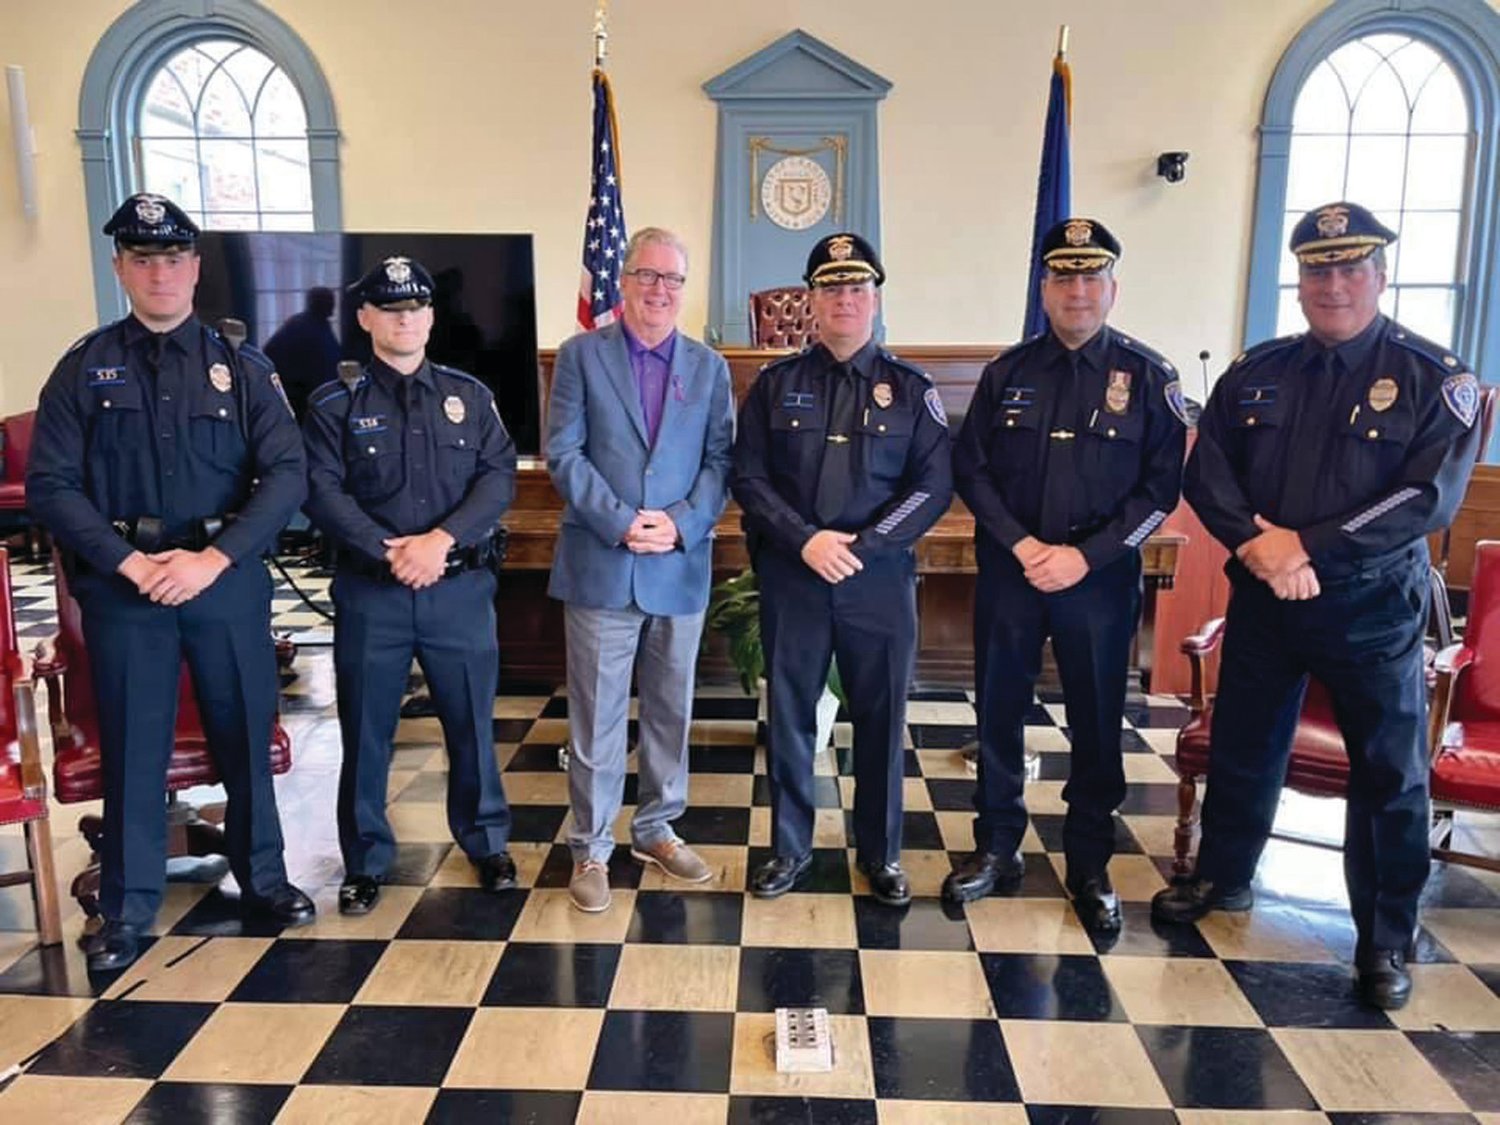 WELCOME TO CRANSTON: From left, Officer Michael Schiappa, Officer Michael Nolan, Mayor Ken Hopkins, Col. Michael Winquist, Maj. Todd Patalano and Maj. Robert Quirk gather during last week’s swearing-in ceremony at City Hall.